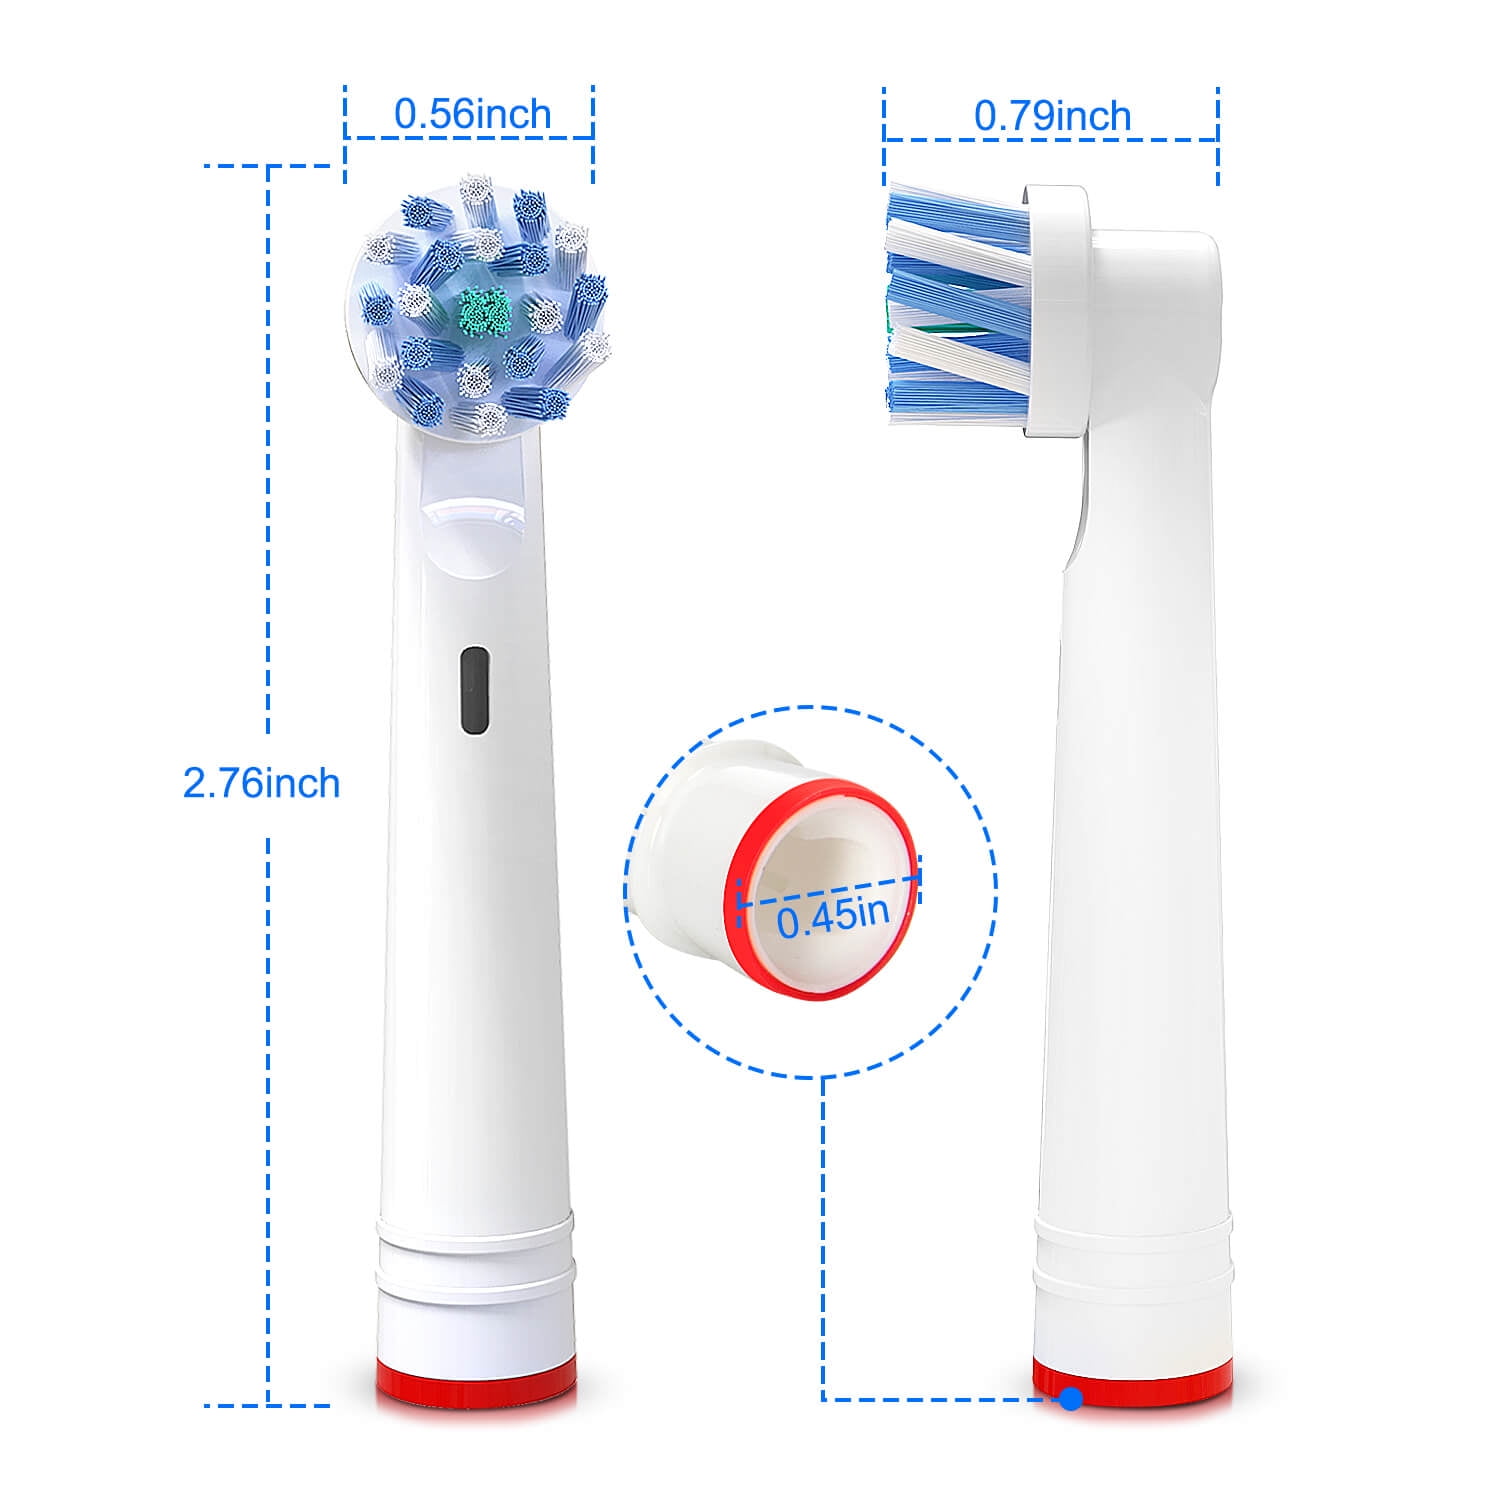 16 Pack Oral B Replacement Toothbrush Heads, Compatible with Braun Oral B Pro Genius and Smart Electric Toothbrush, Include 4 Floss, 4 3-D White, 4 Cross and 4 Clean Brush Heads - Walmart.com